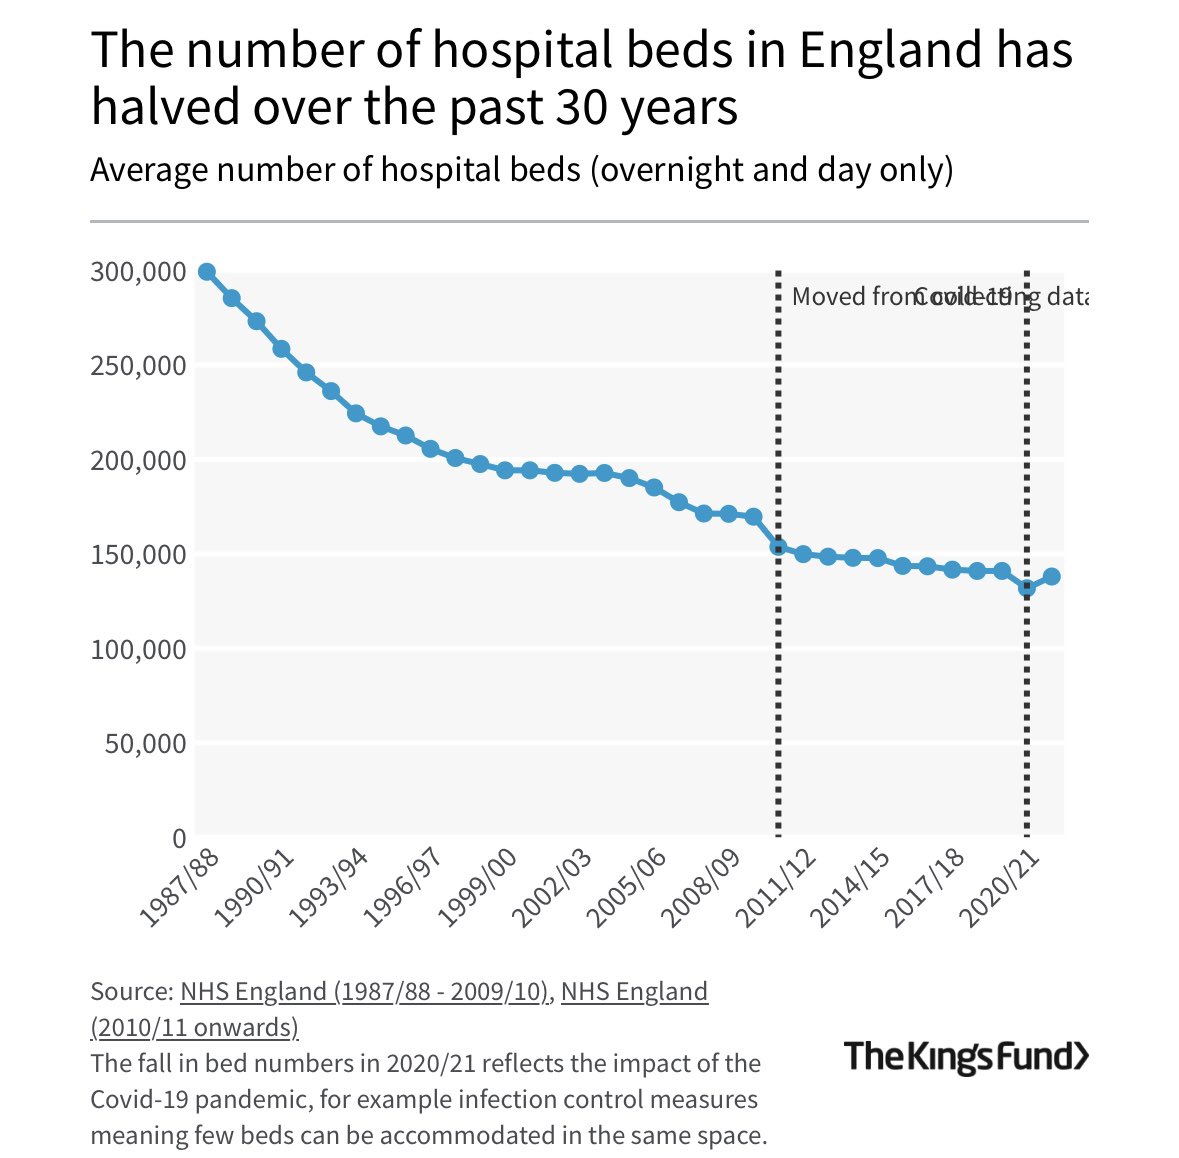 The number of hospital beds in England has halved over the past 30 years.